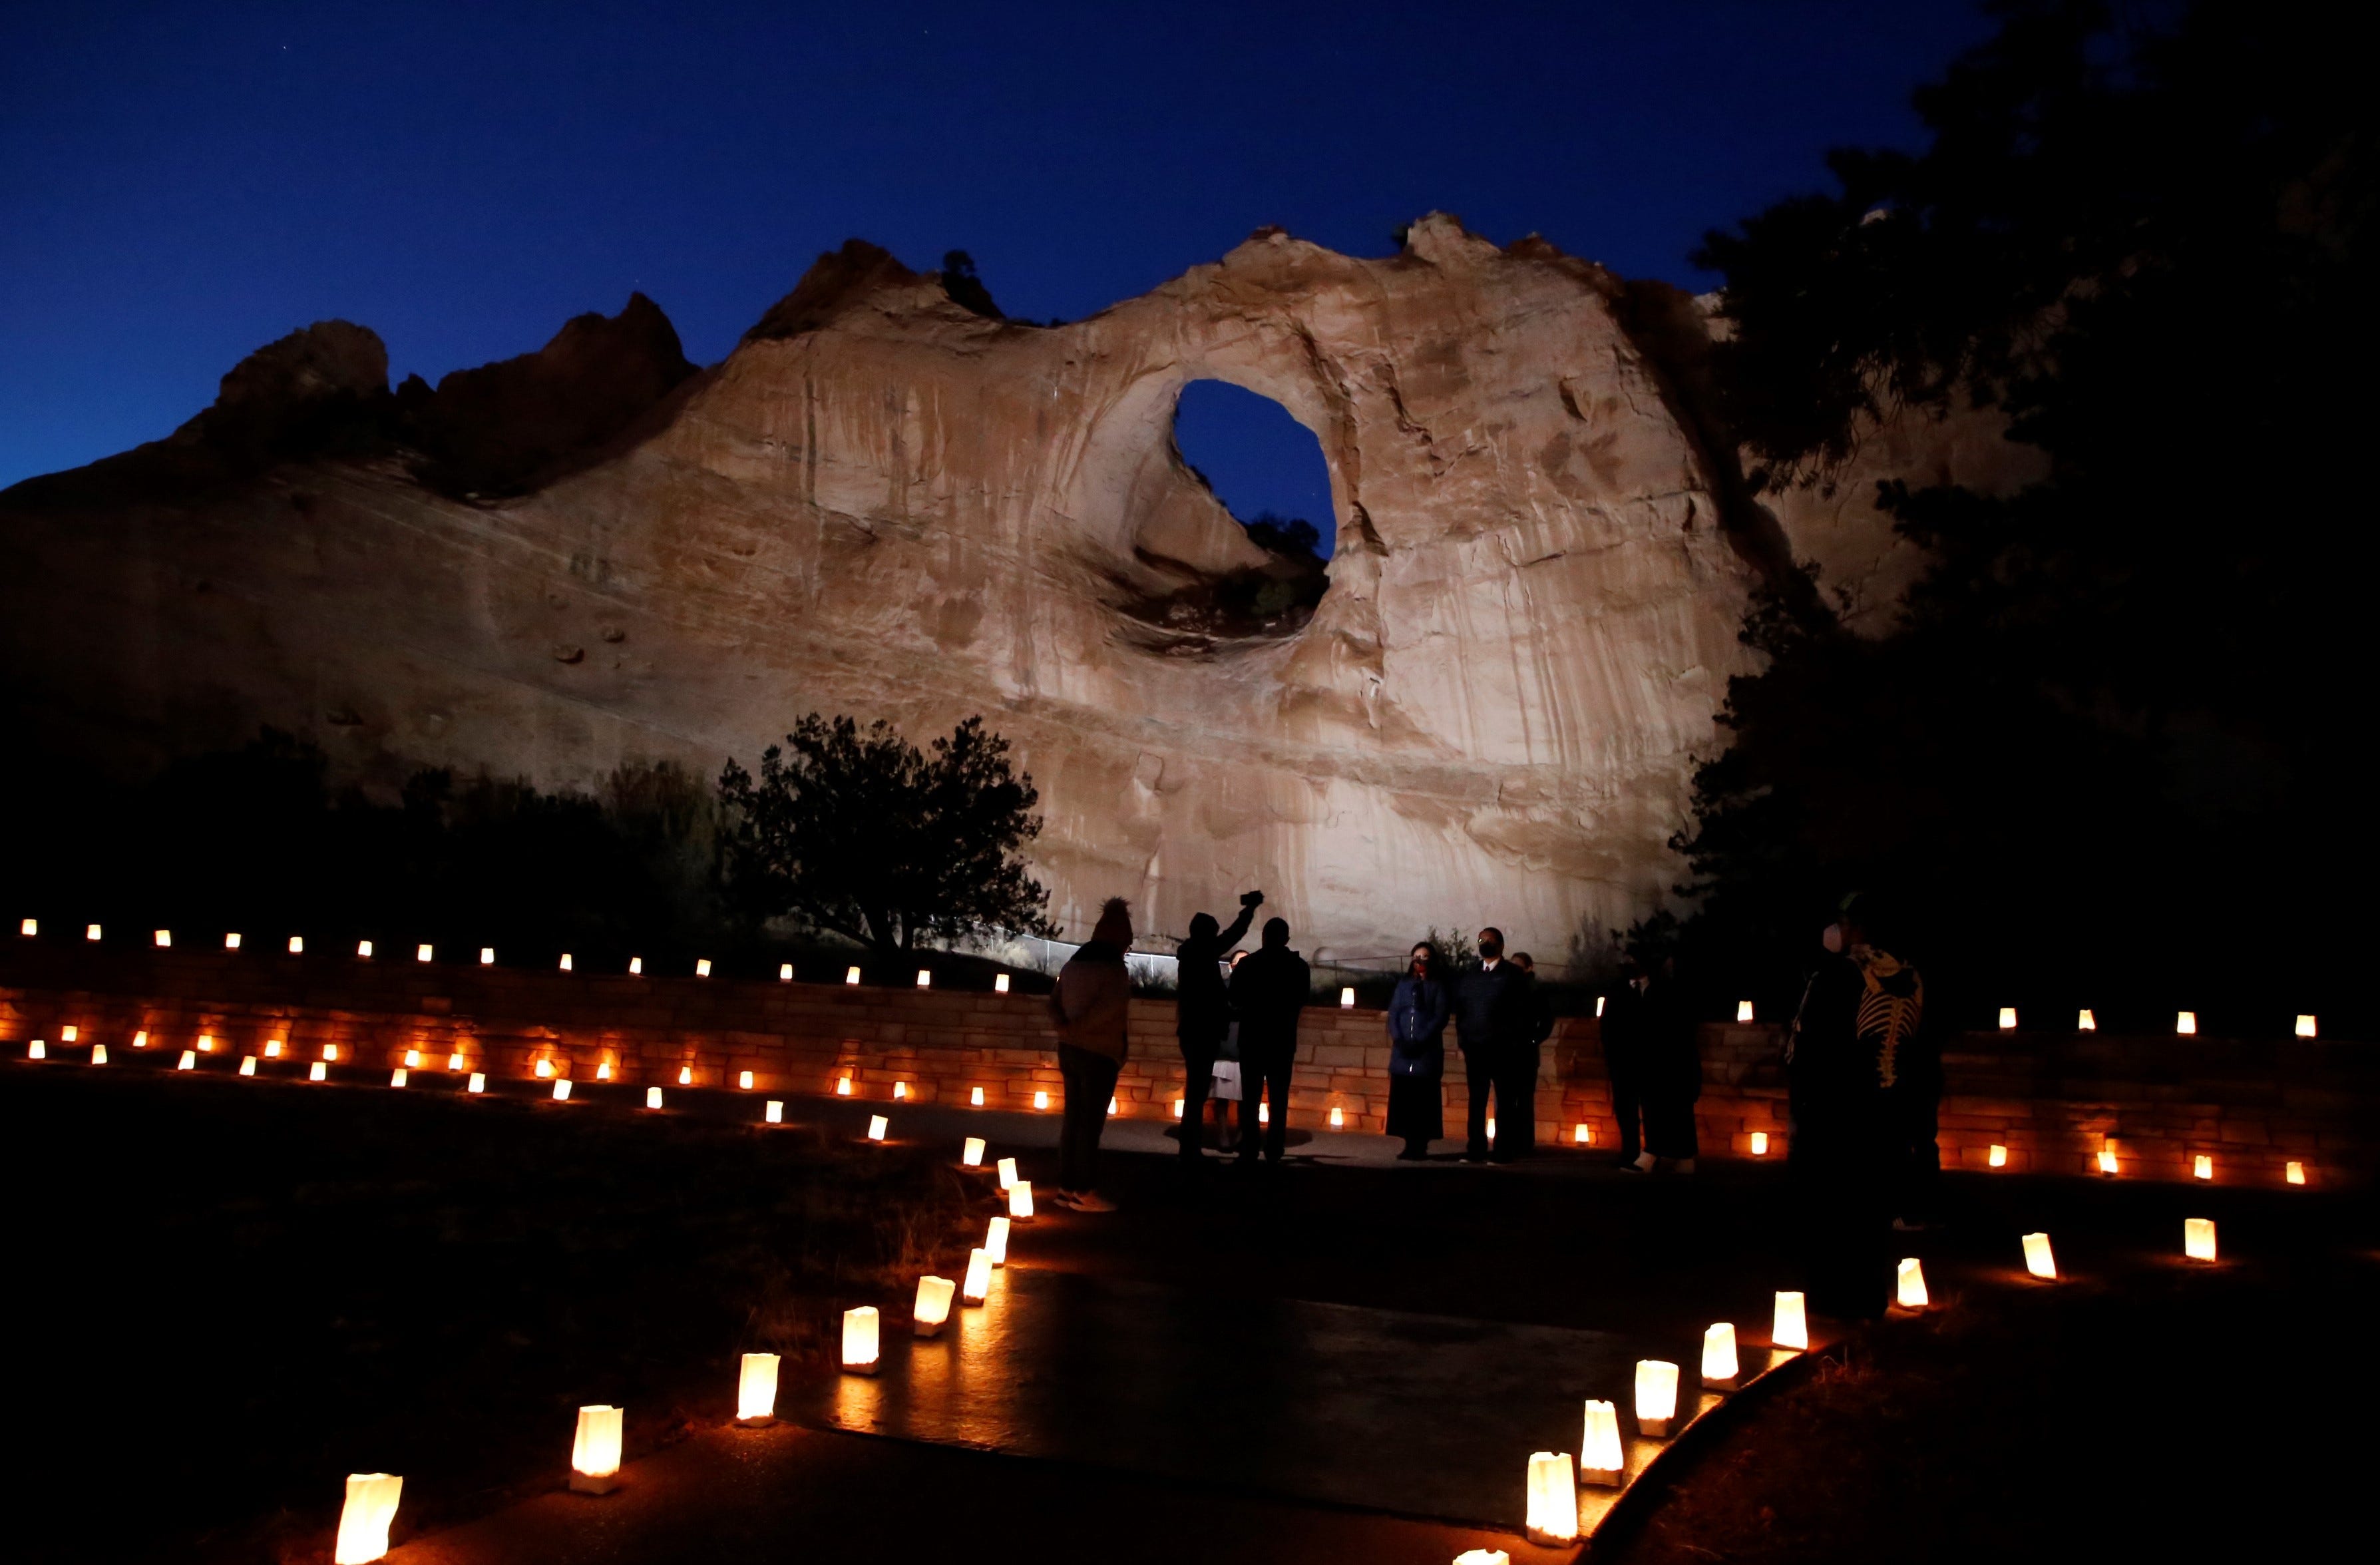 The Window Rock formation is illuminated on March 17 in Window Rock, Ariz. during an event to remember members of the Navajo Nation who died of COVID-19.